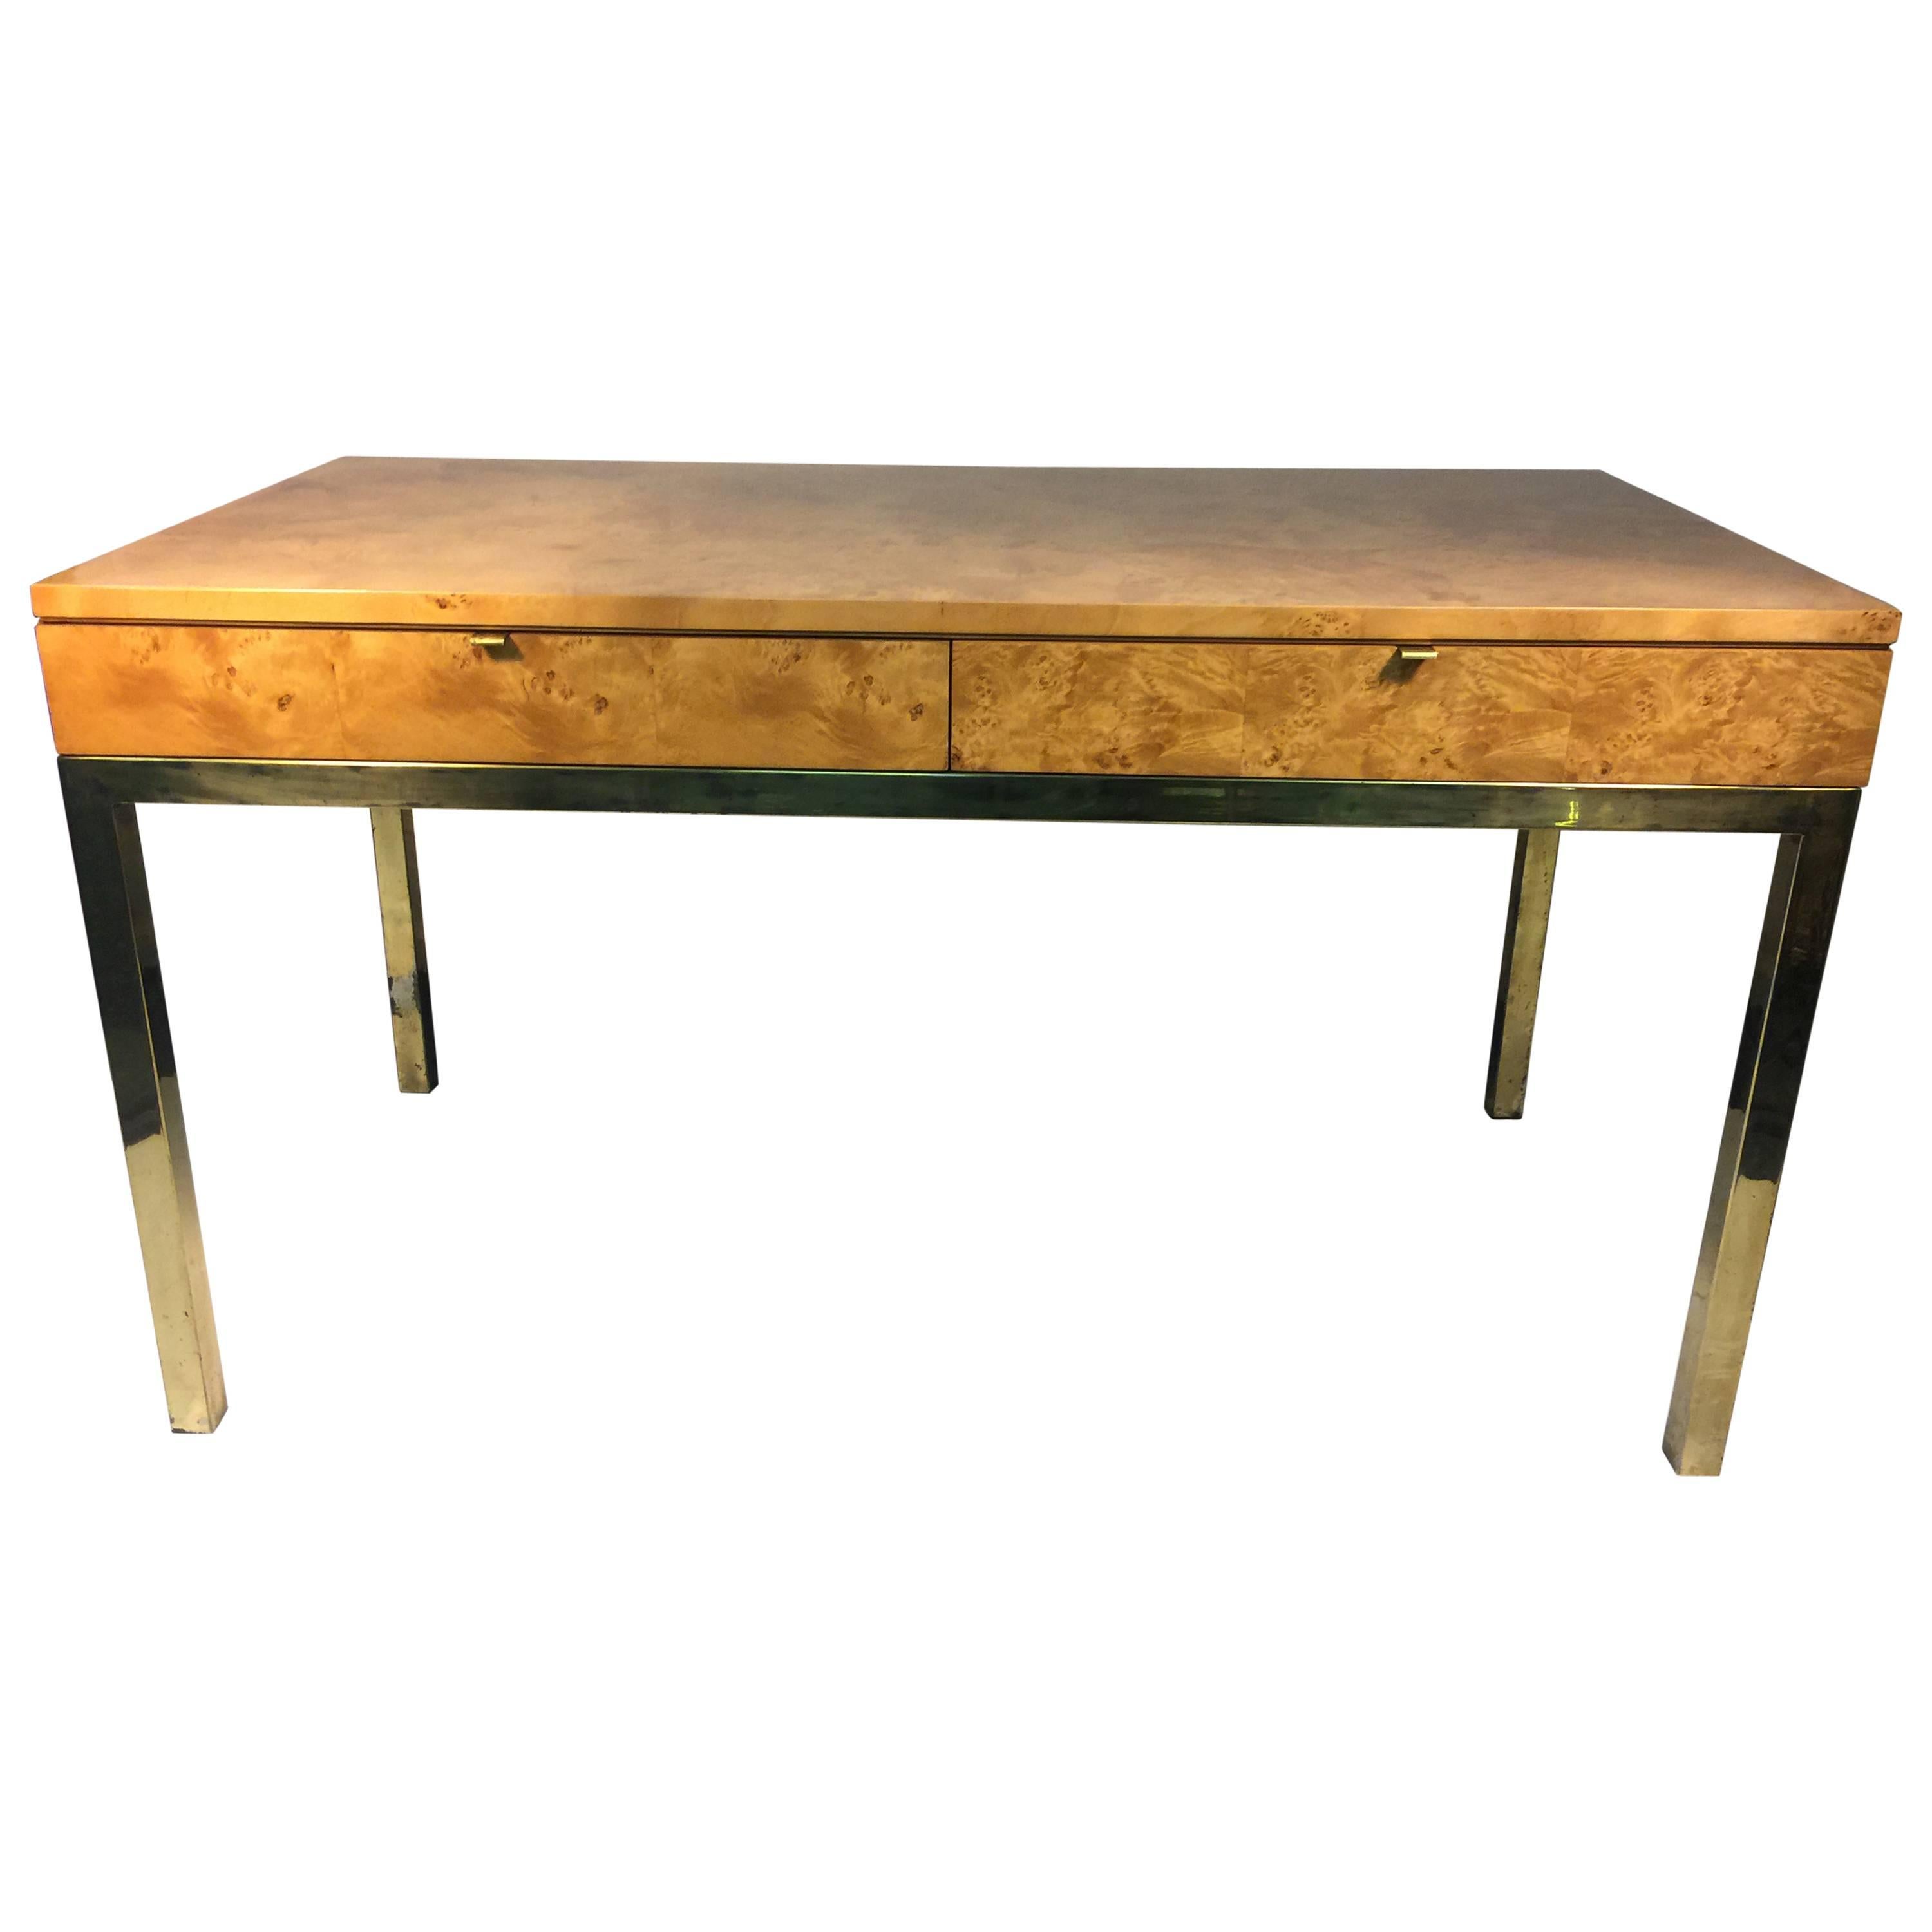 Magnificent Milo Baughman Burl Wood Desk or Console Table with Brass Base For Sale